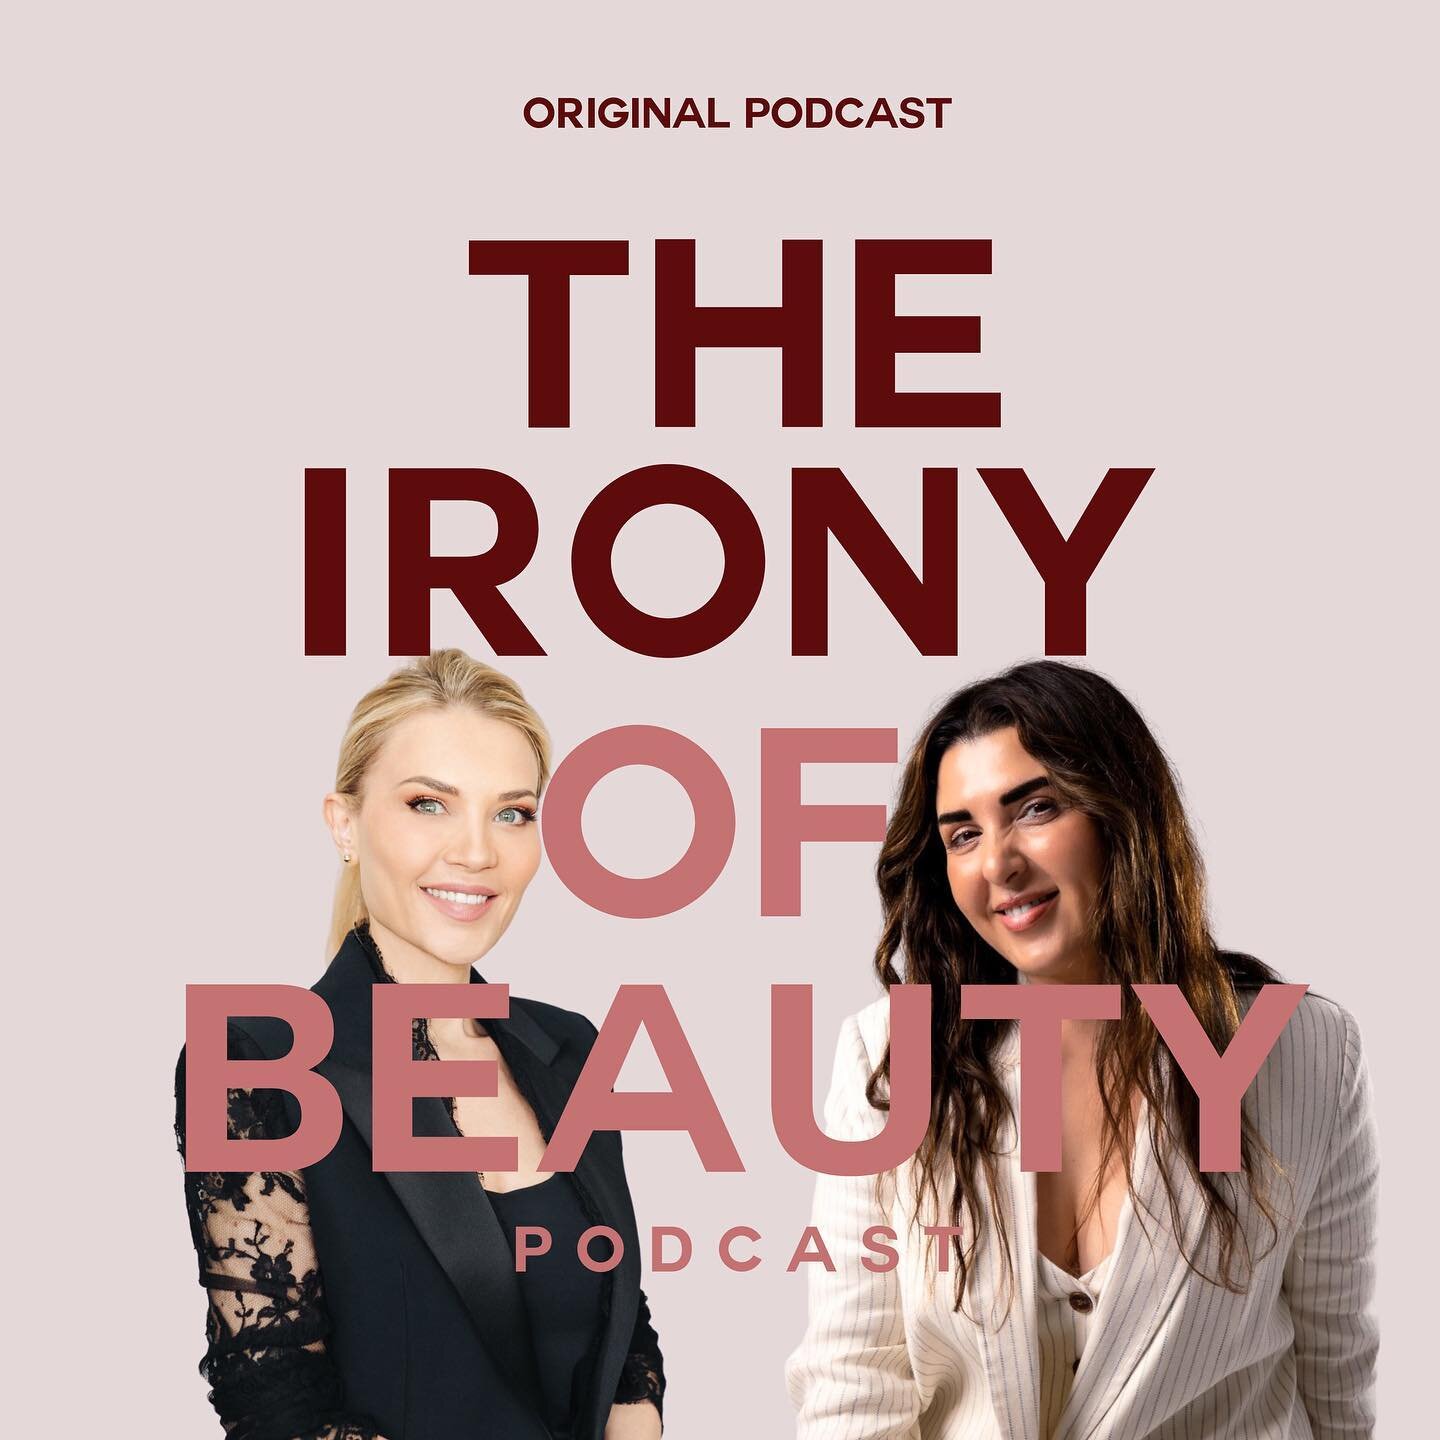 The Irony of Beauty is a biweekly podcast hosted by skincare experts Fiona Tuck and Rose Bonasera. Fiona and Rose love a good chat (and sometimes a heated debate) about all things skin and nutrition, calling out scaremongering, misinformation, and mi